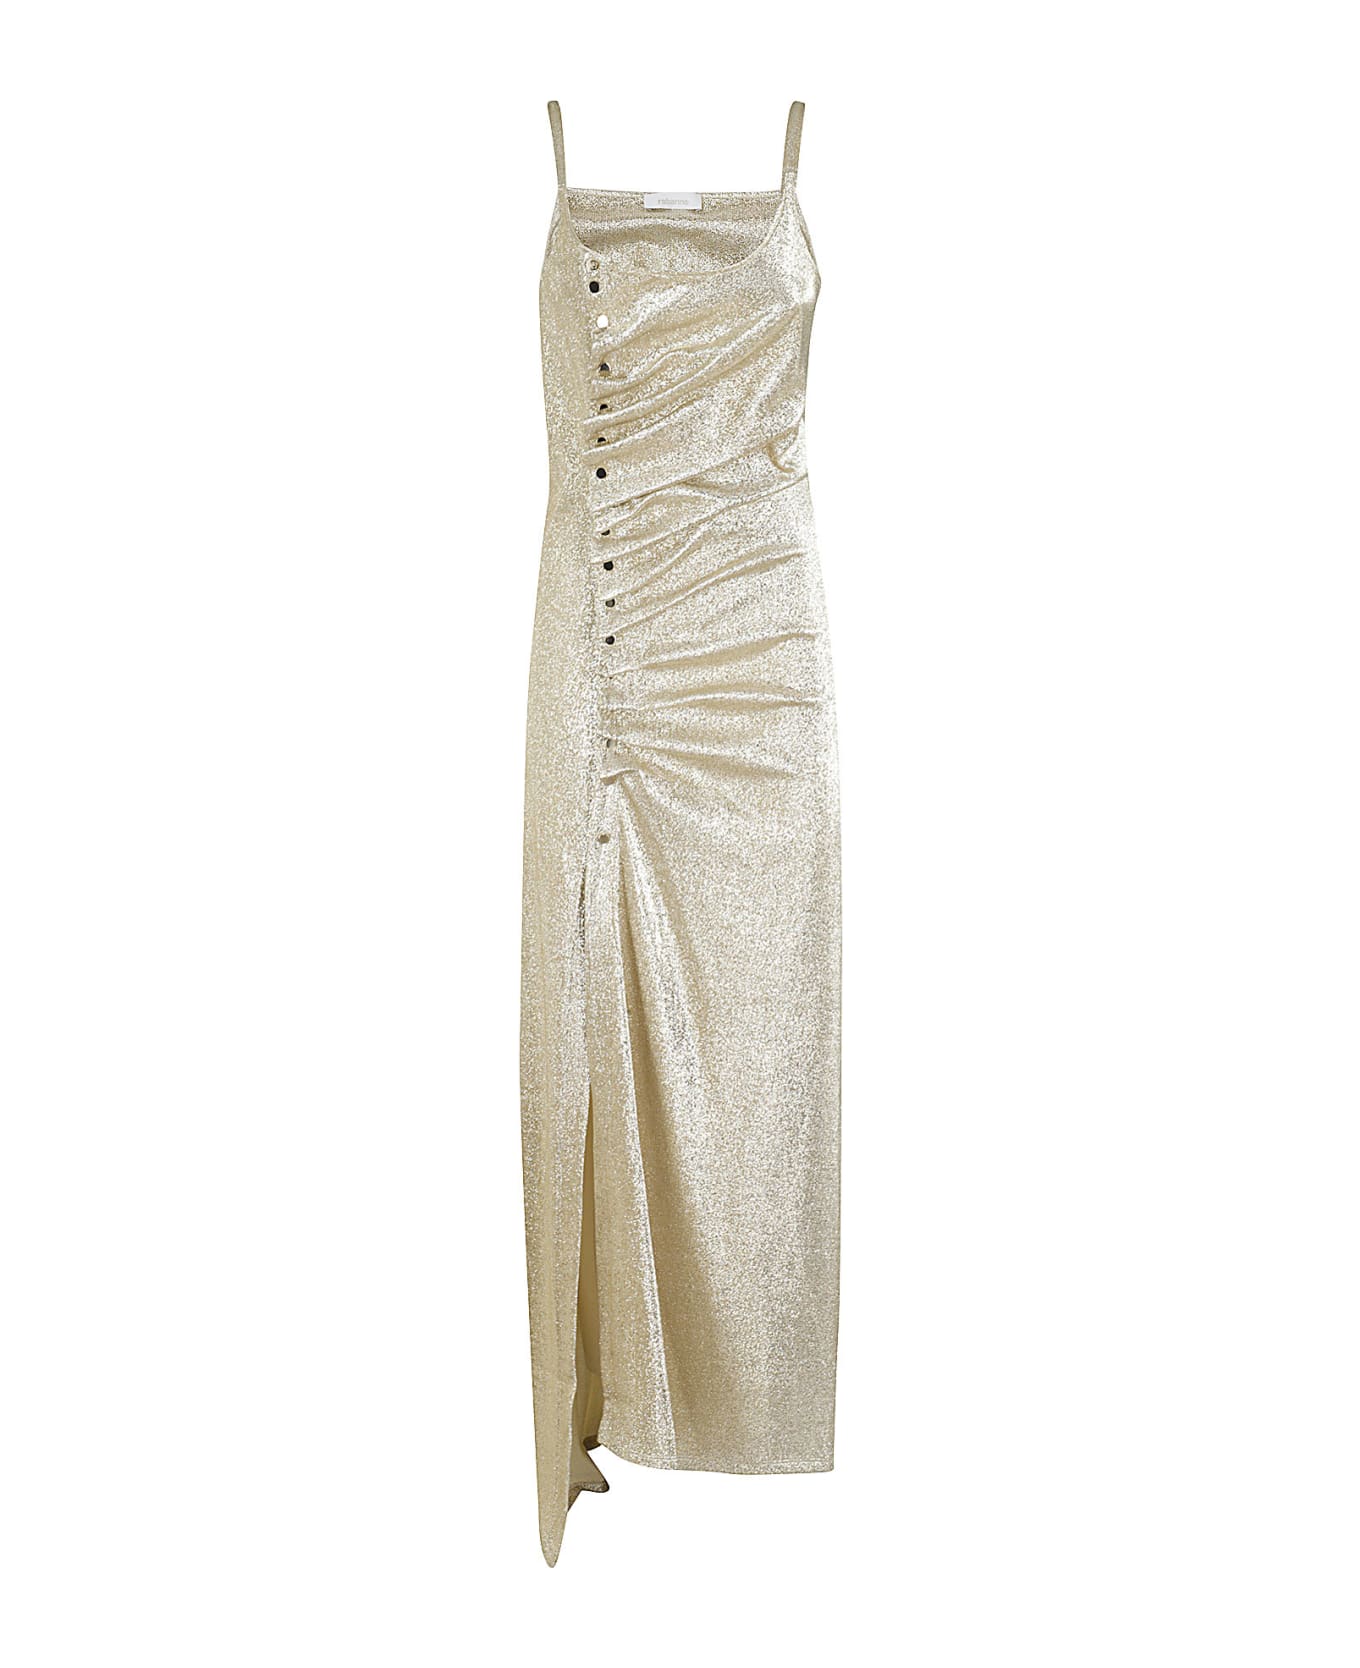 Paco Rabanne Robe - Silver Gold